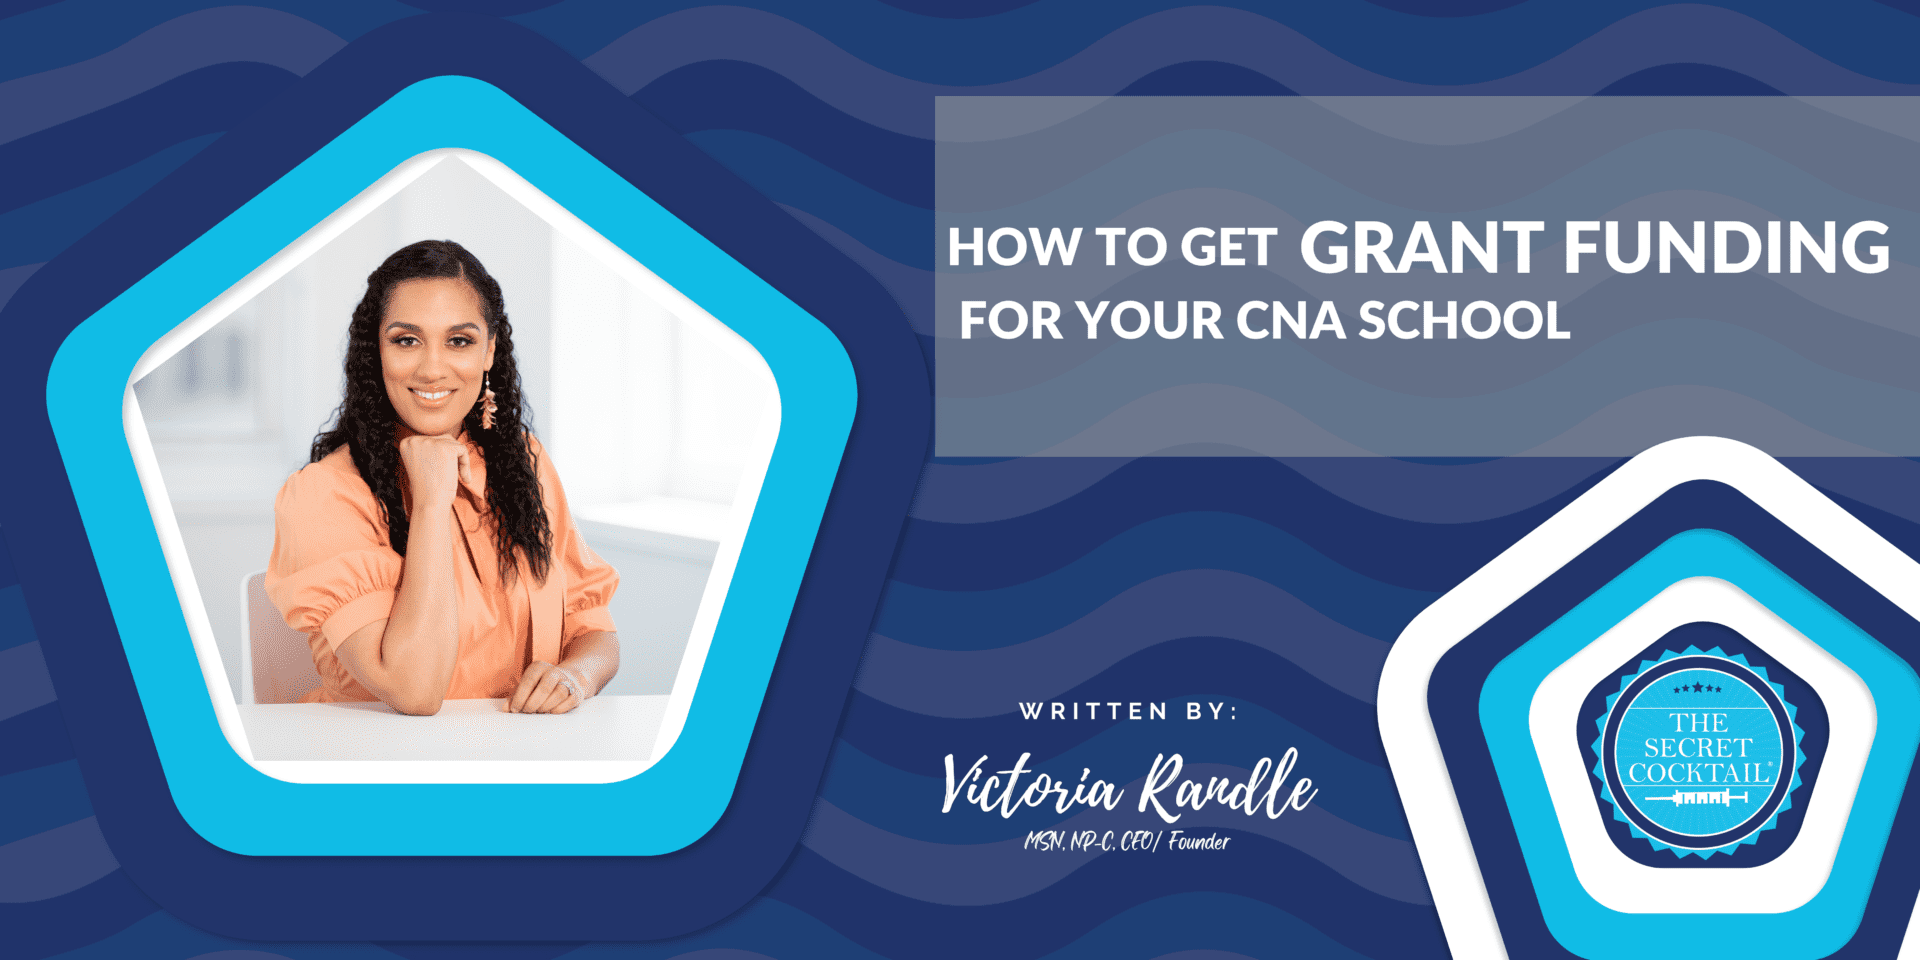 How to Get Grant Funding for your CNA School